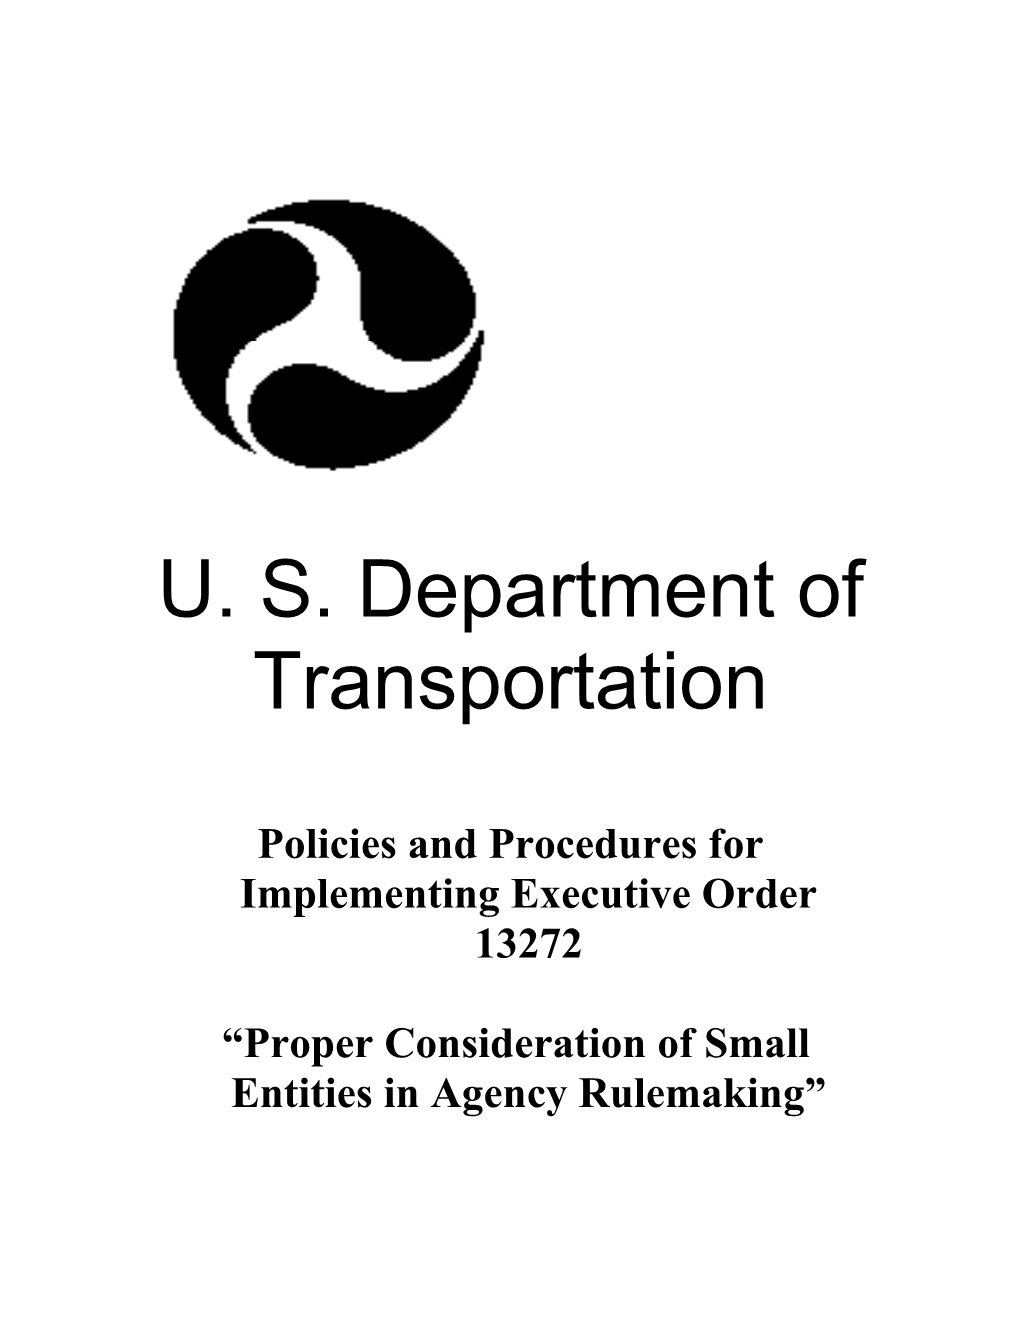 Department of Transportation Policies and Procedures for Implementing